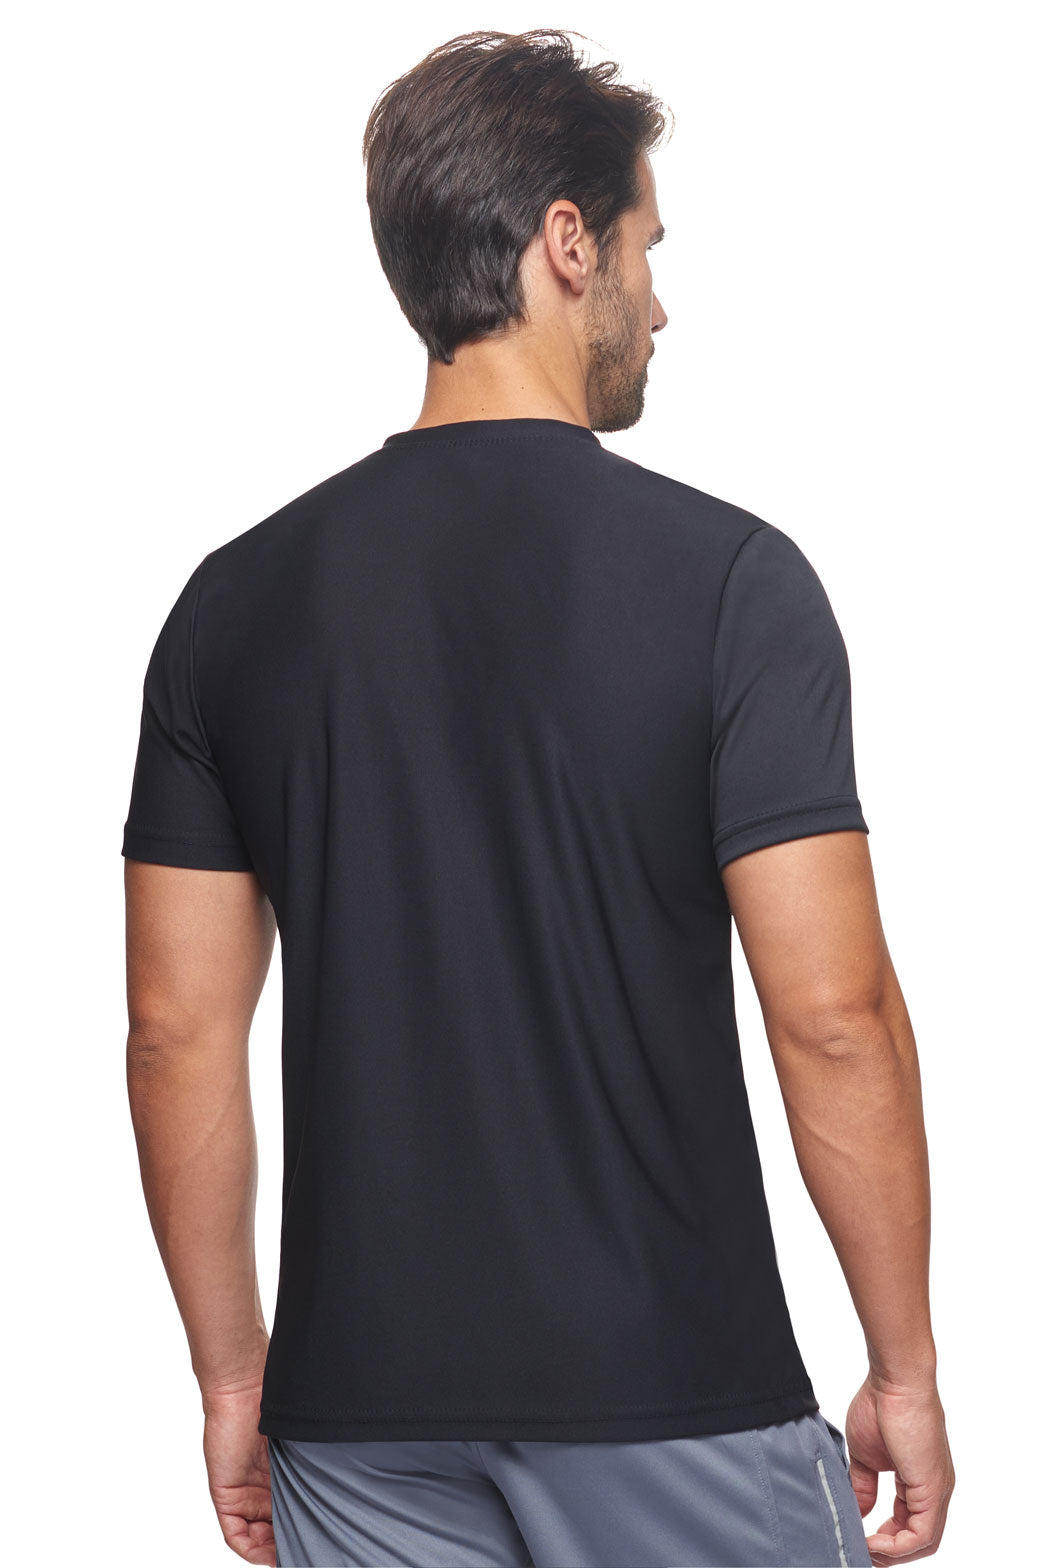 Expert Brand Apparel Made in USA Recycled Polyester Repreve Performance Tee Unisex RP801U black image 3#black